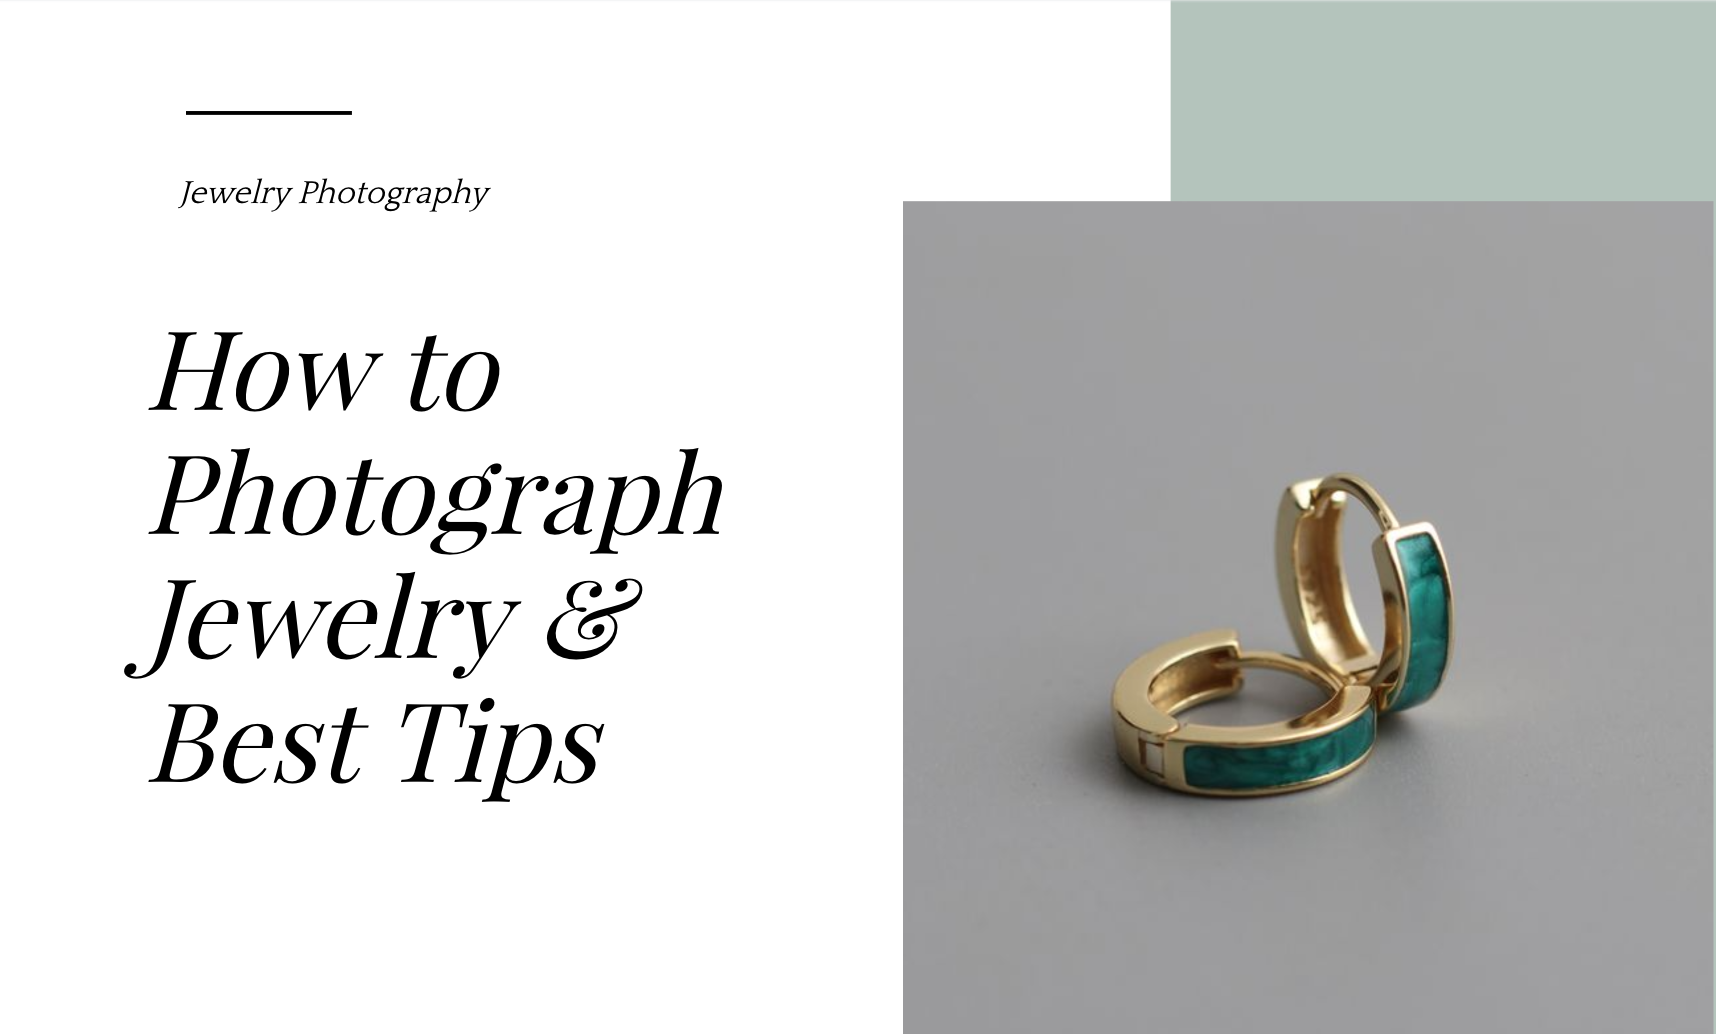 Jewelry Photography: How to Photograph Jewelry & Best Tips | Fotor